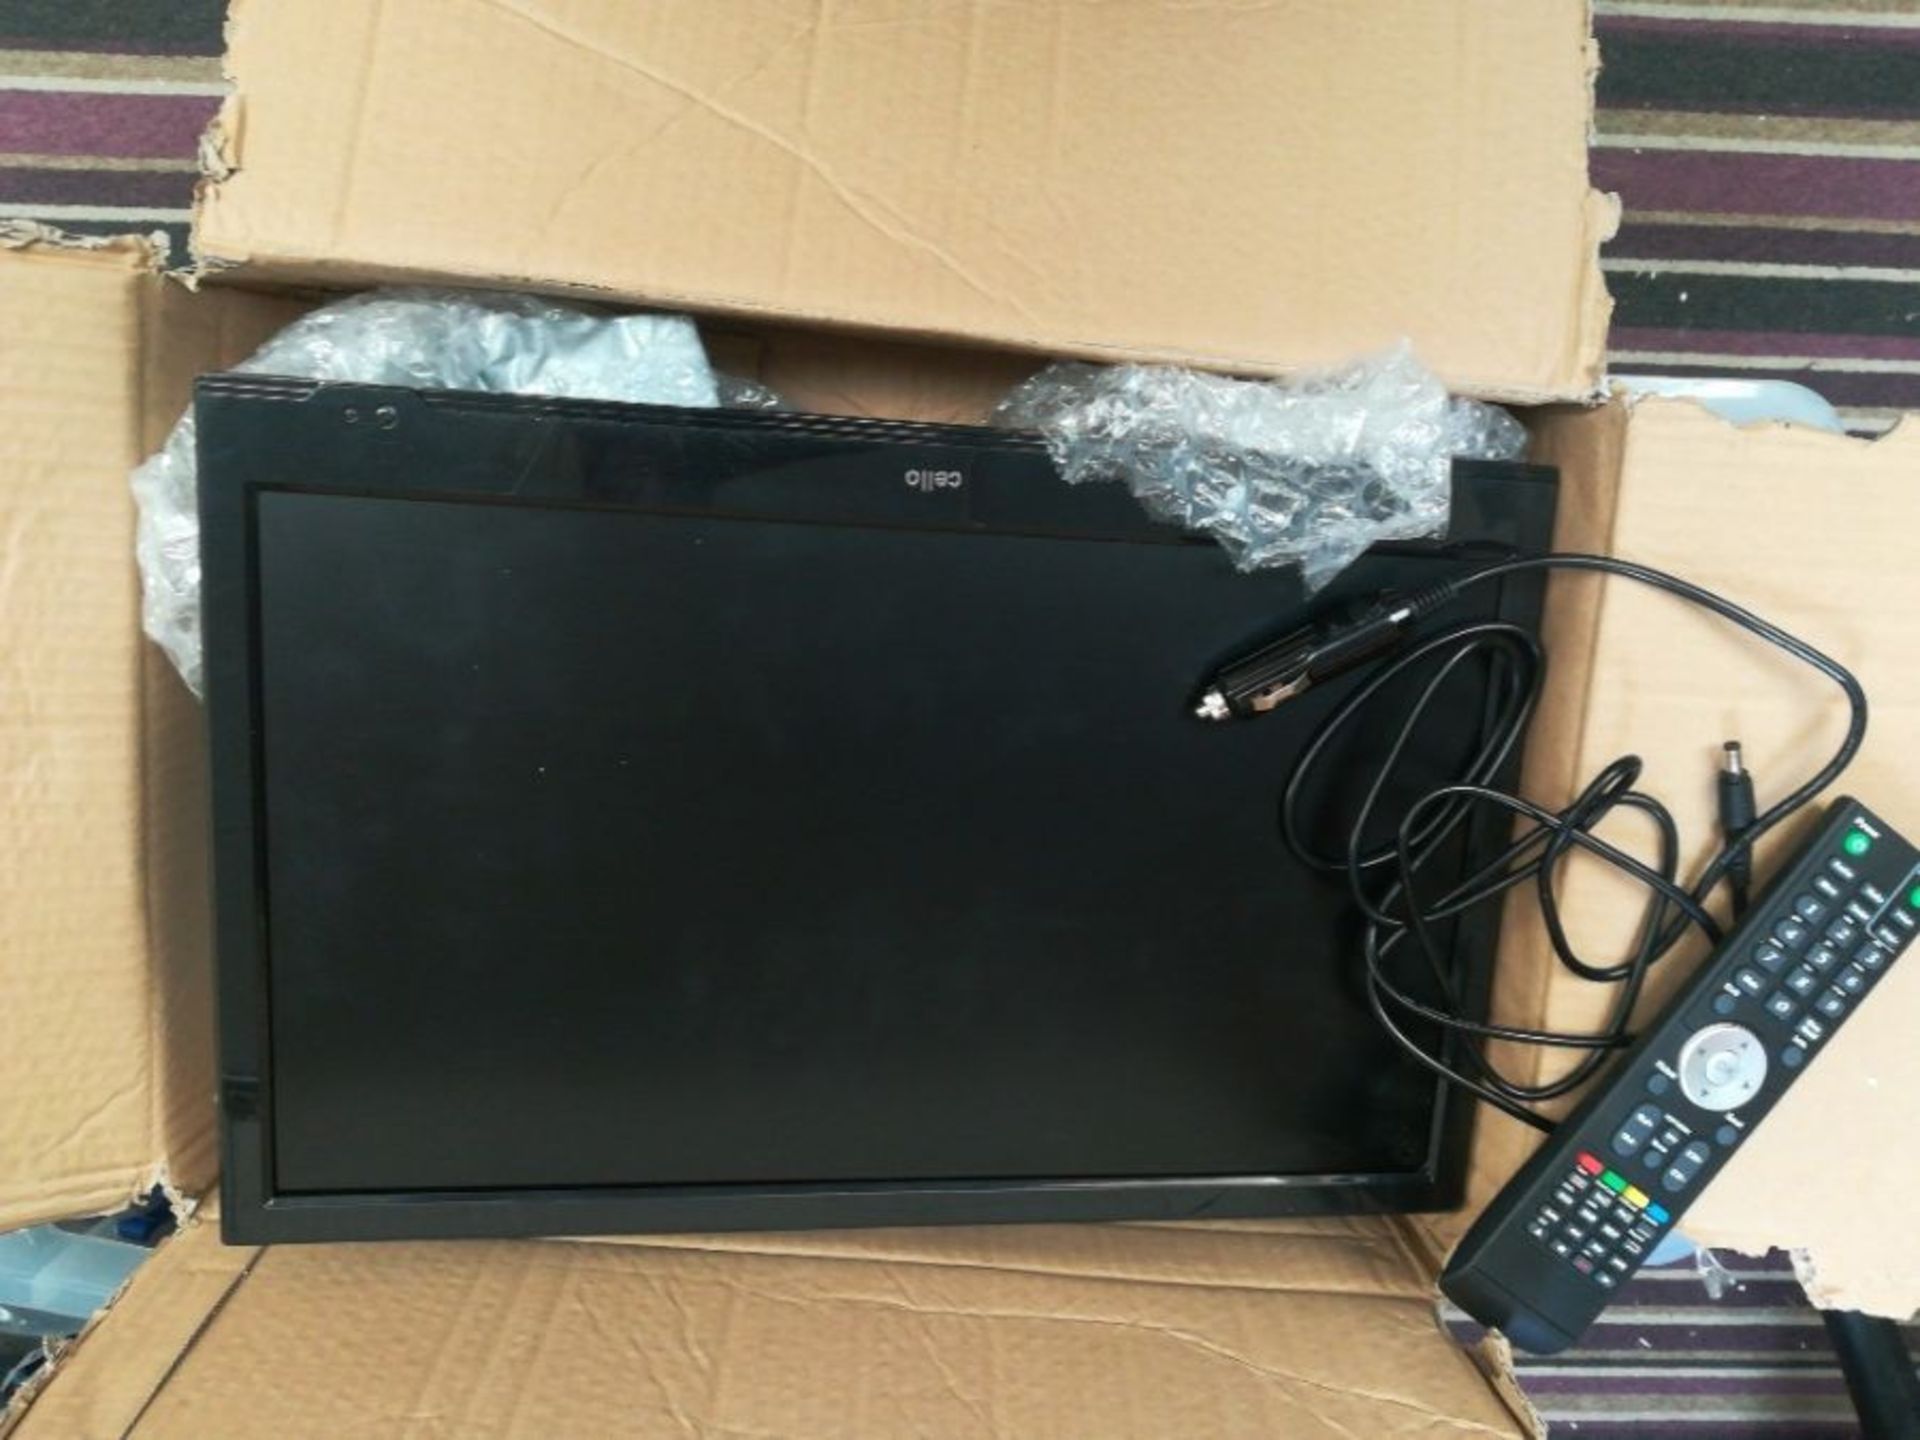 RRP £126.00 Cello ZSF0291 19" inch LED TV/DVD Freeview HD with Satellite Receiver | 2020 Model | M - Image 2 of 2